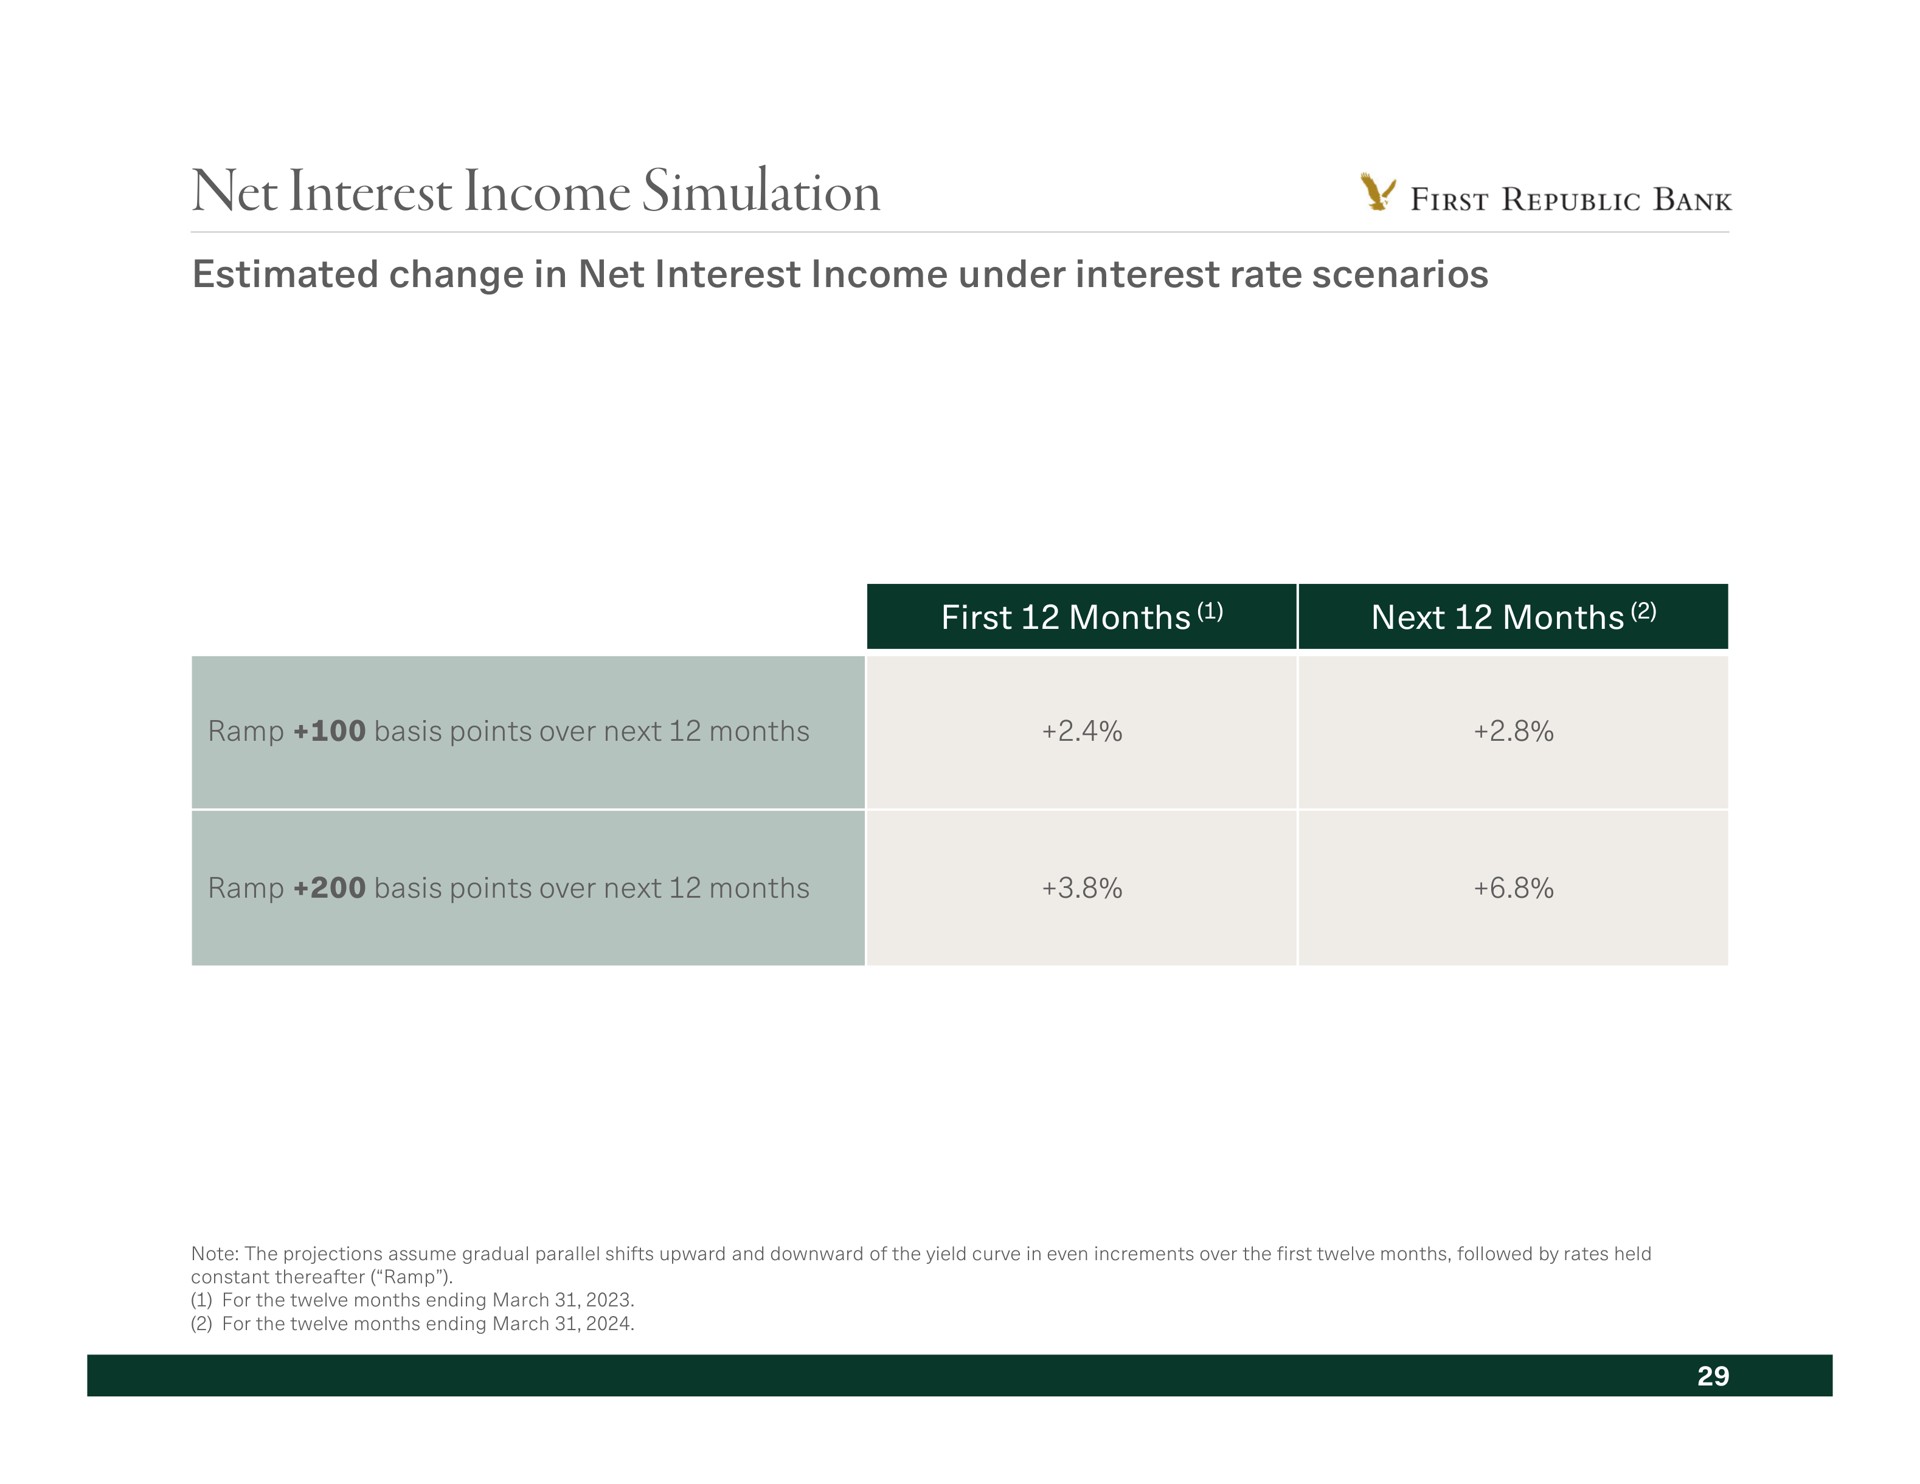 net interest income simulation repose estimated change in under rate scenarios | First Republic Bank